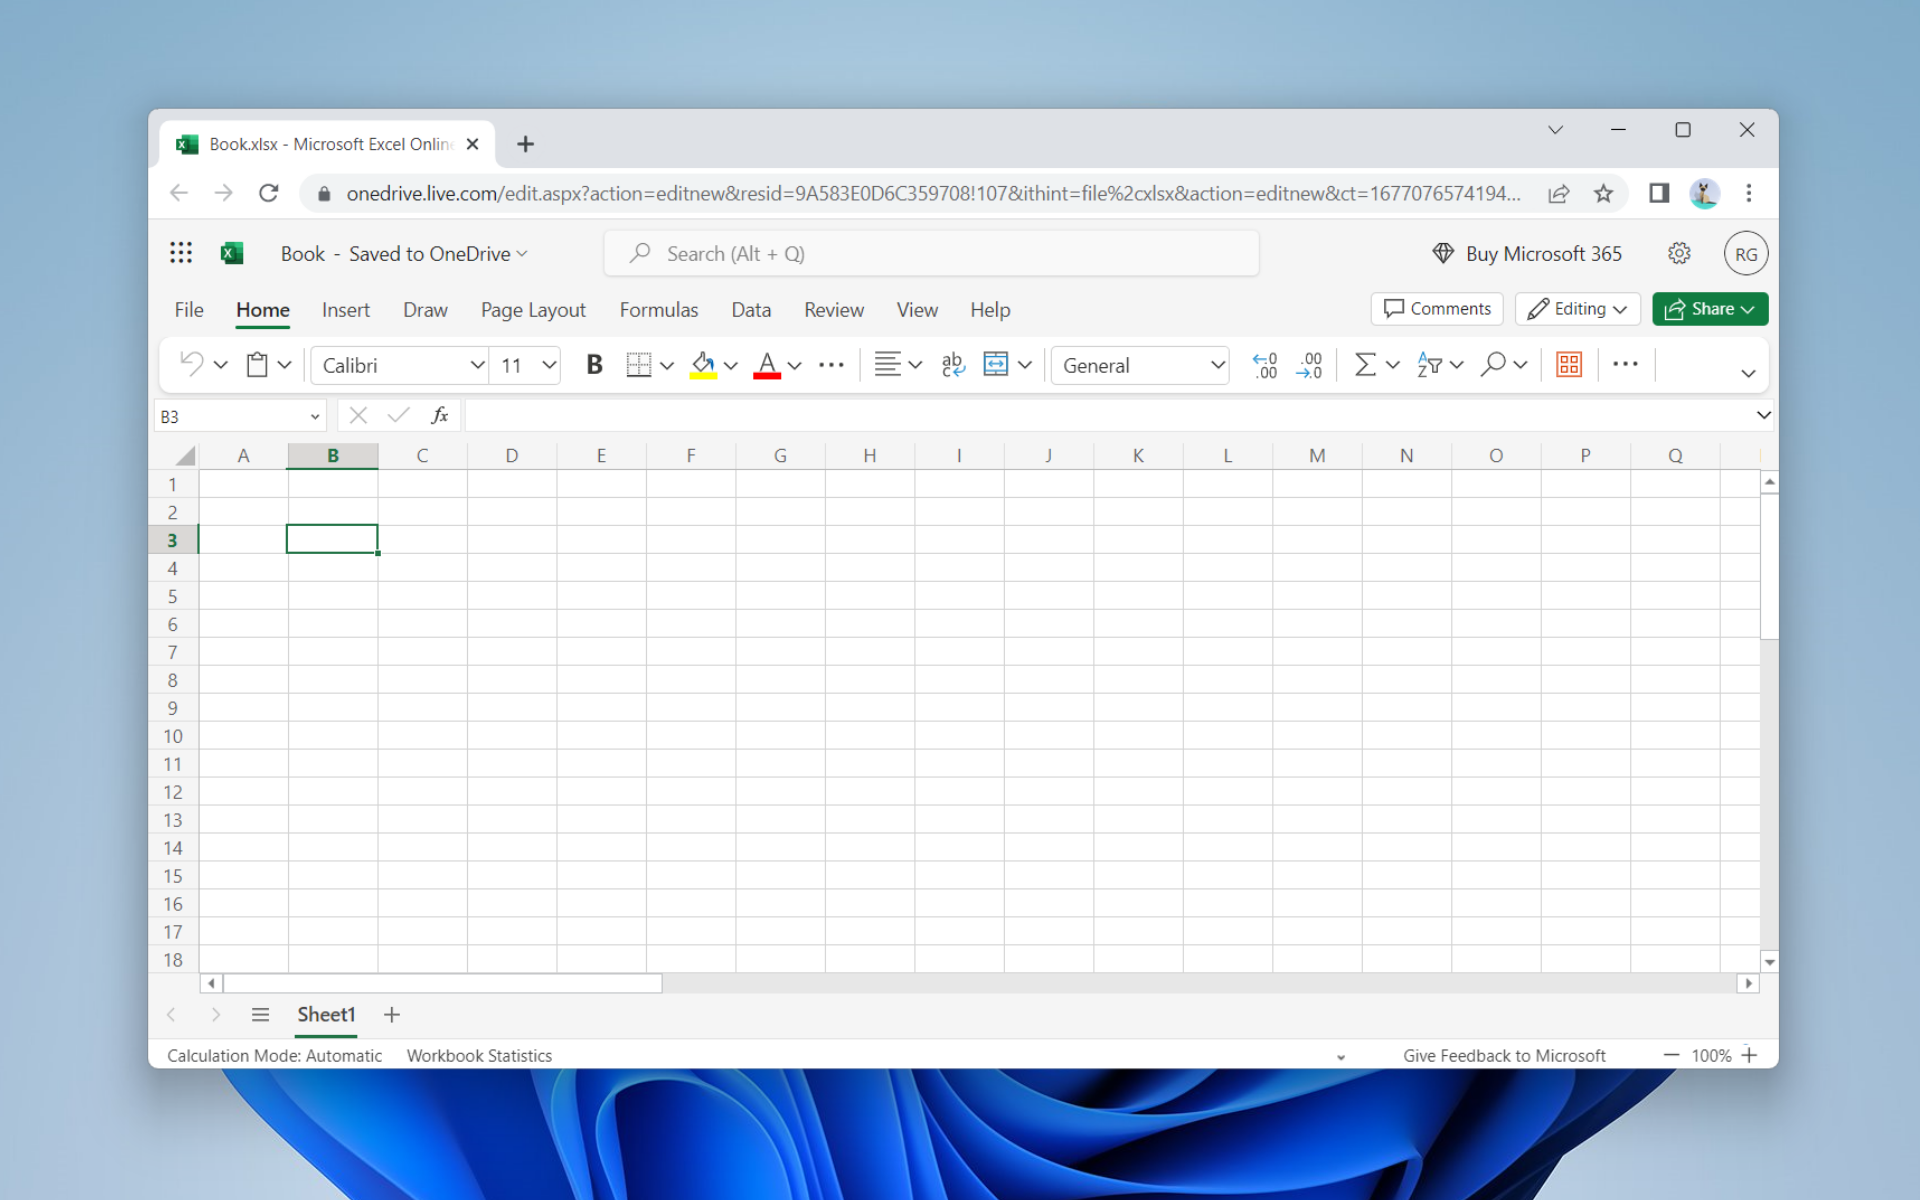 How to insert images into cells in Microsoft Excel